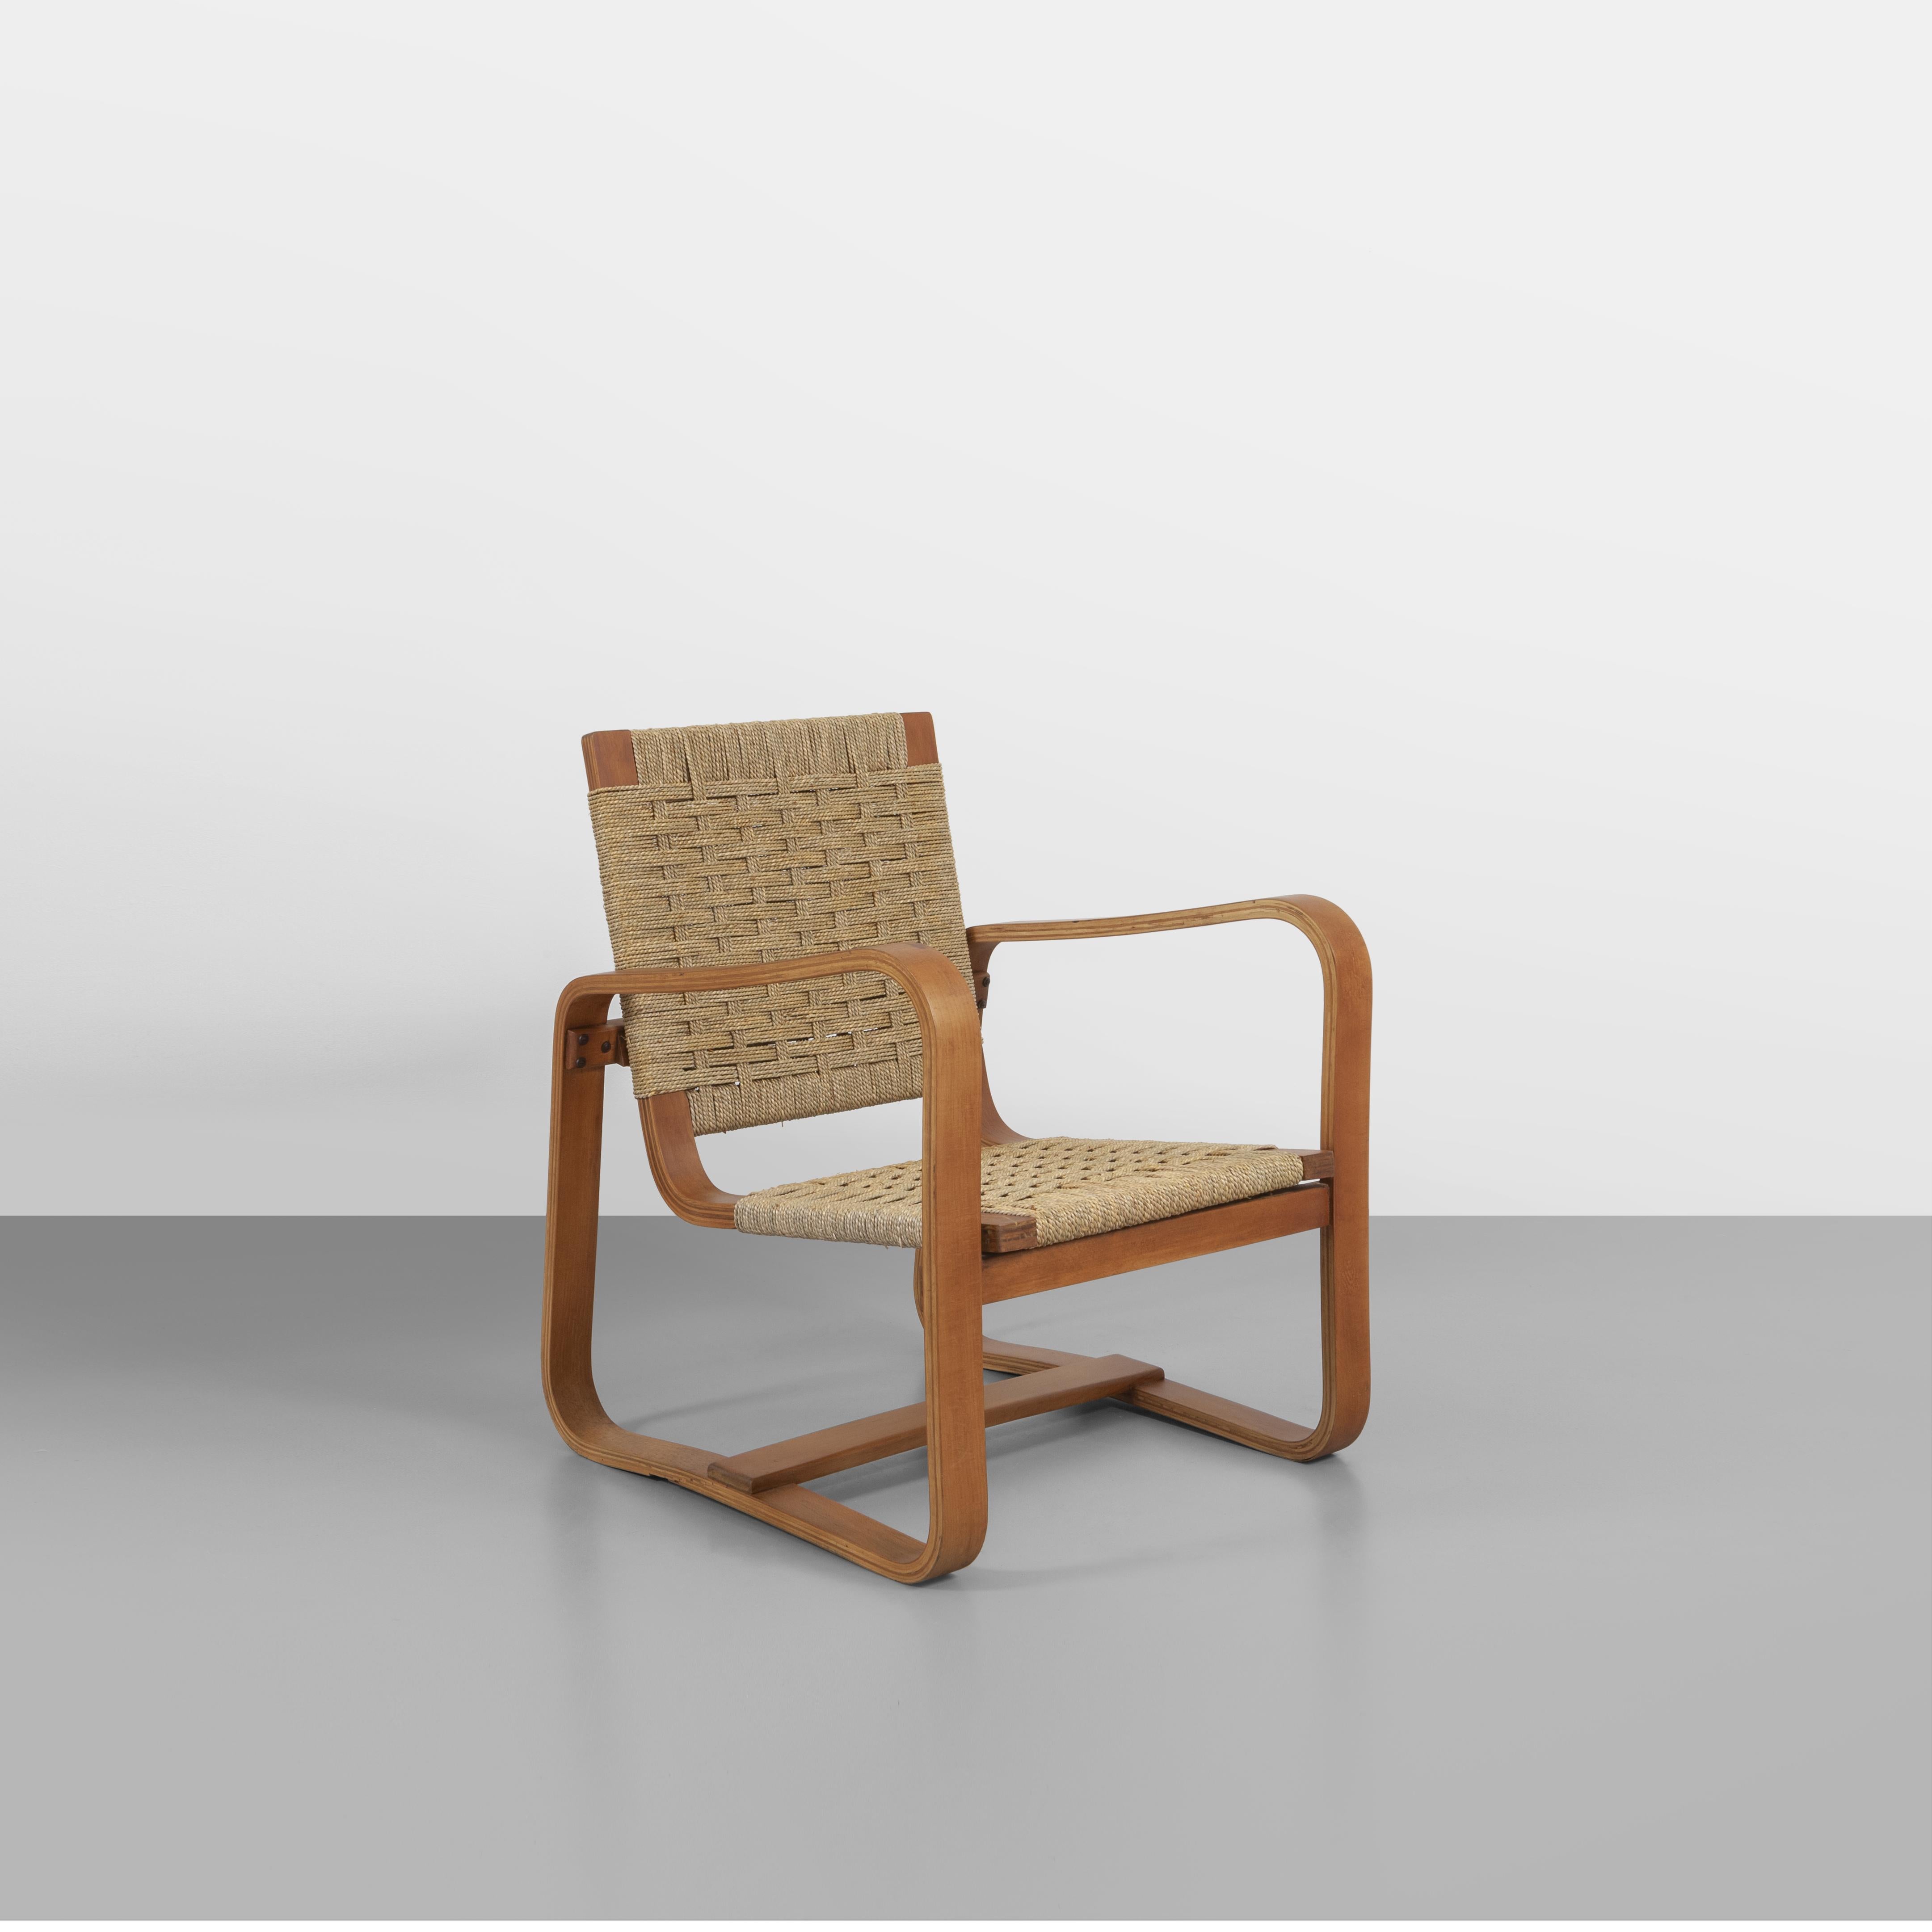 Laminated Bentwood Armchair by Giuseppe Pagano Pogatschnig and Gino Maggioni, 1942